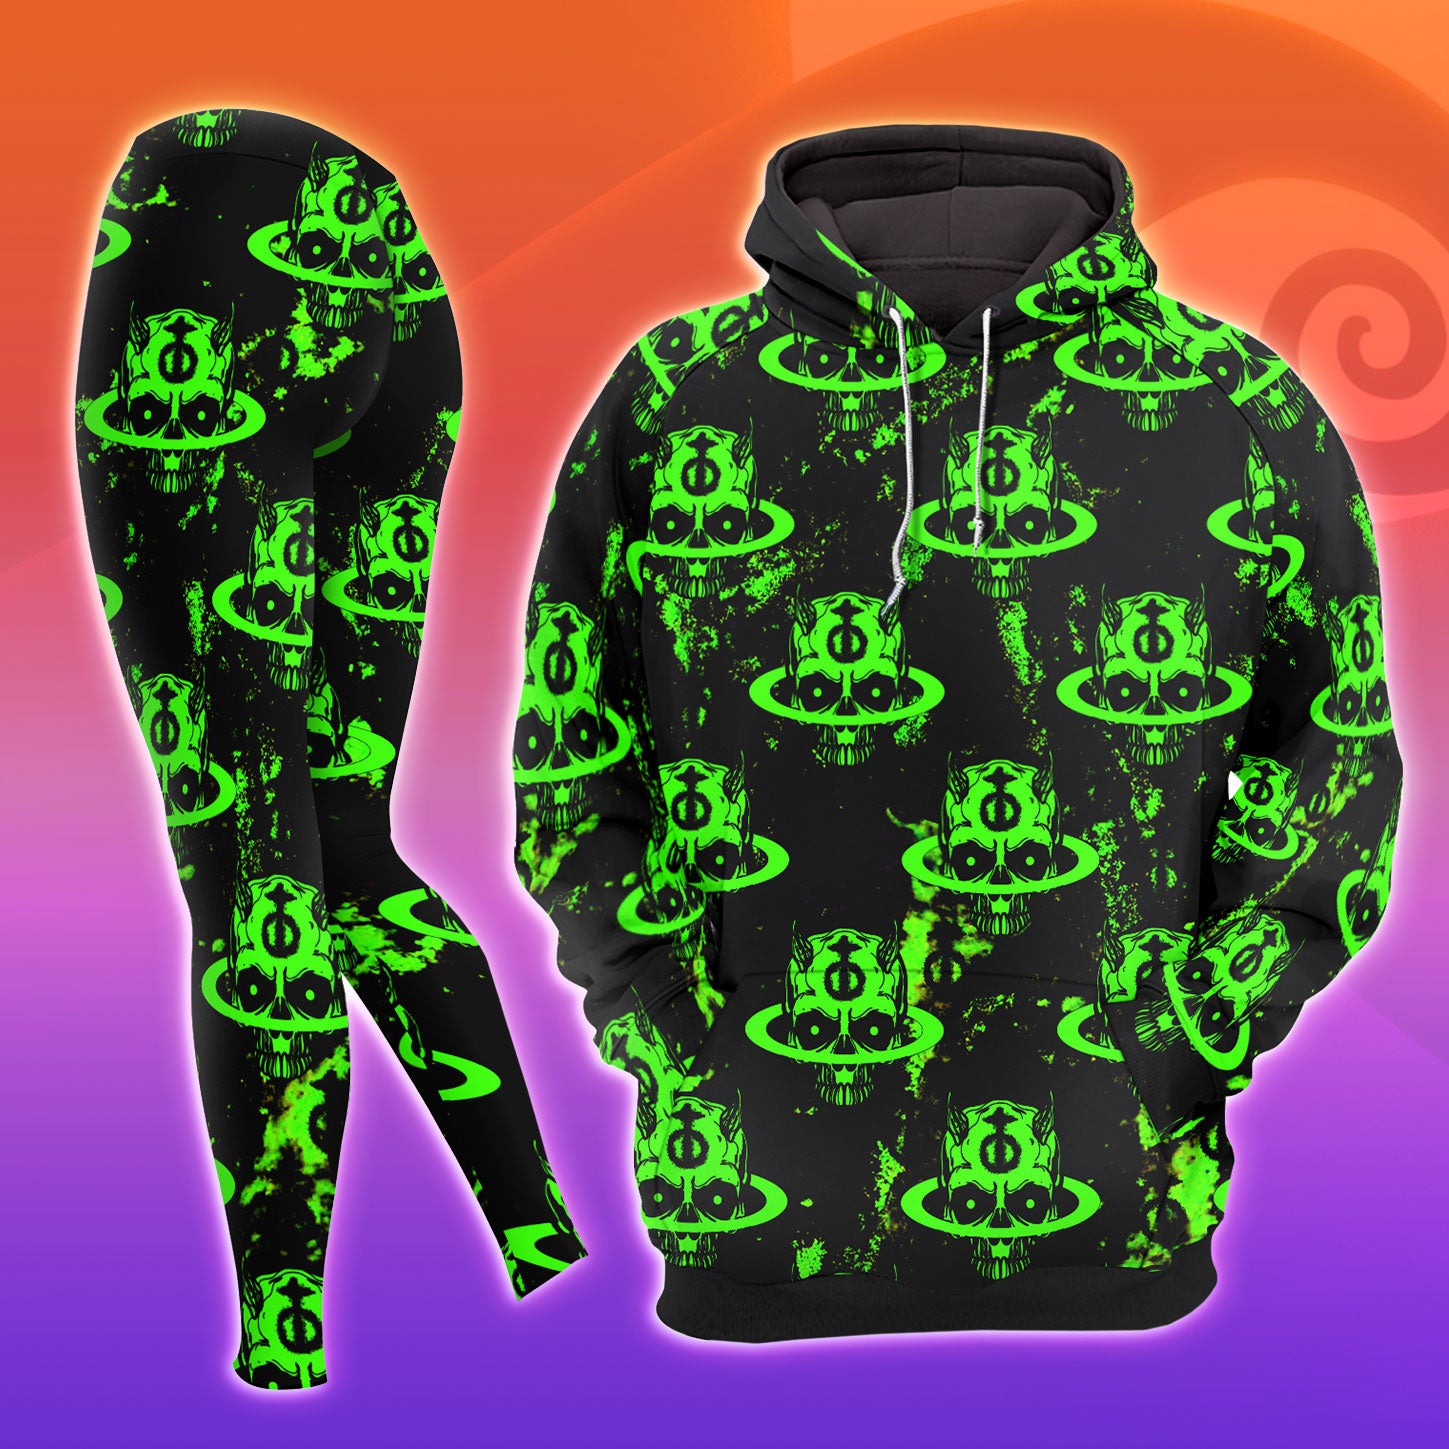 Black Green Skull Combo Hoodie and Leggings - Dark and edgy matching set with skull designs for a unique and stylish look